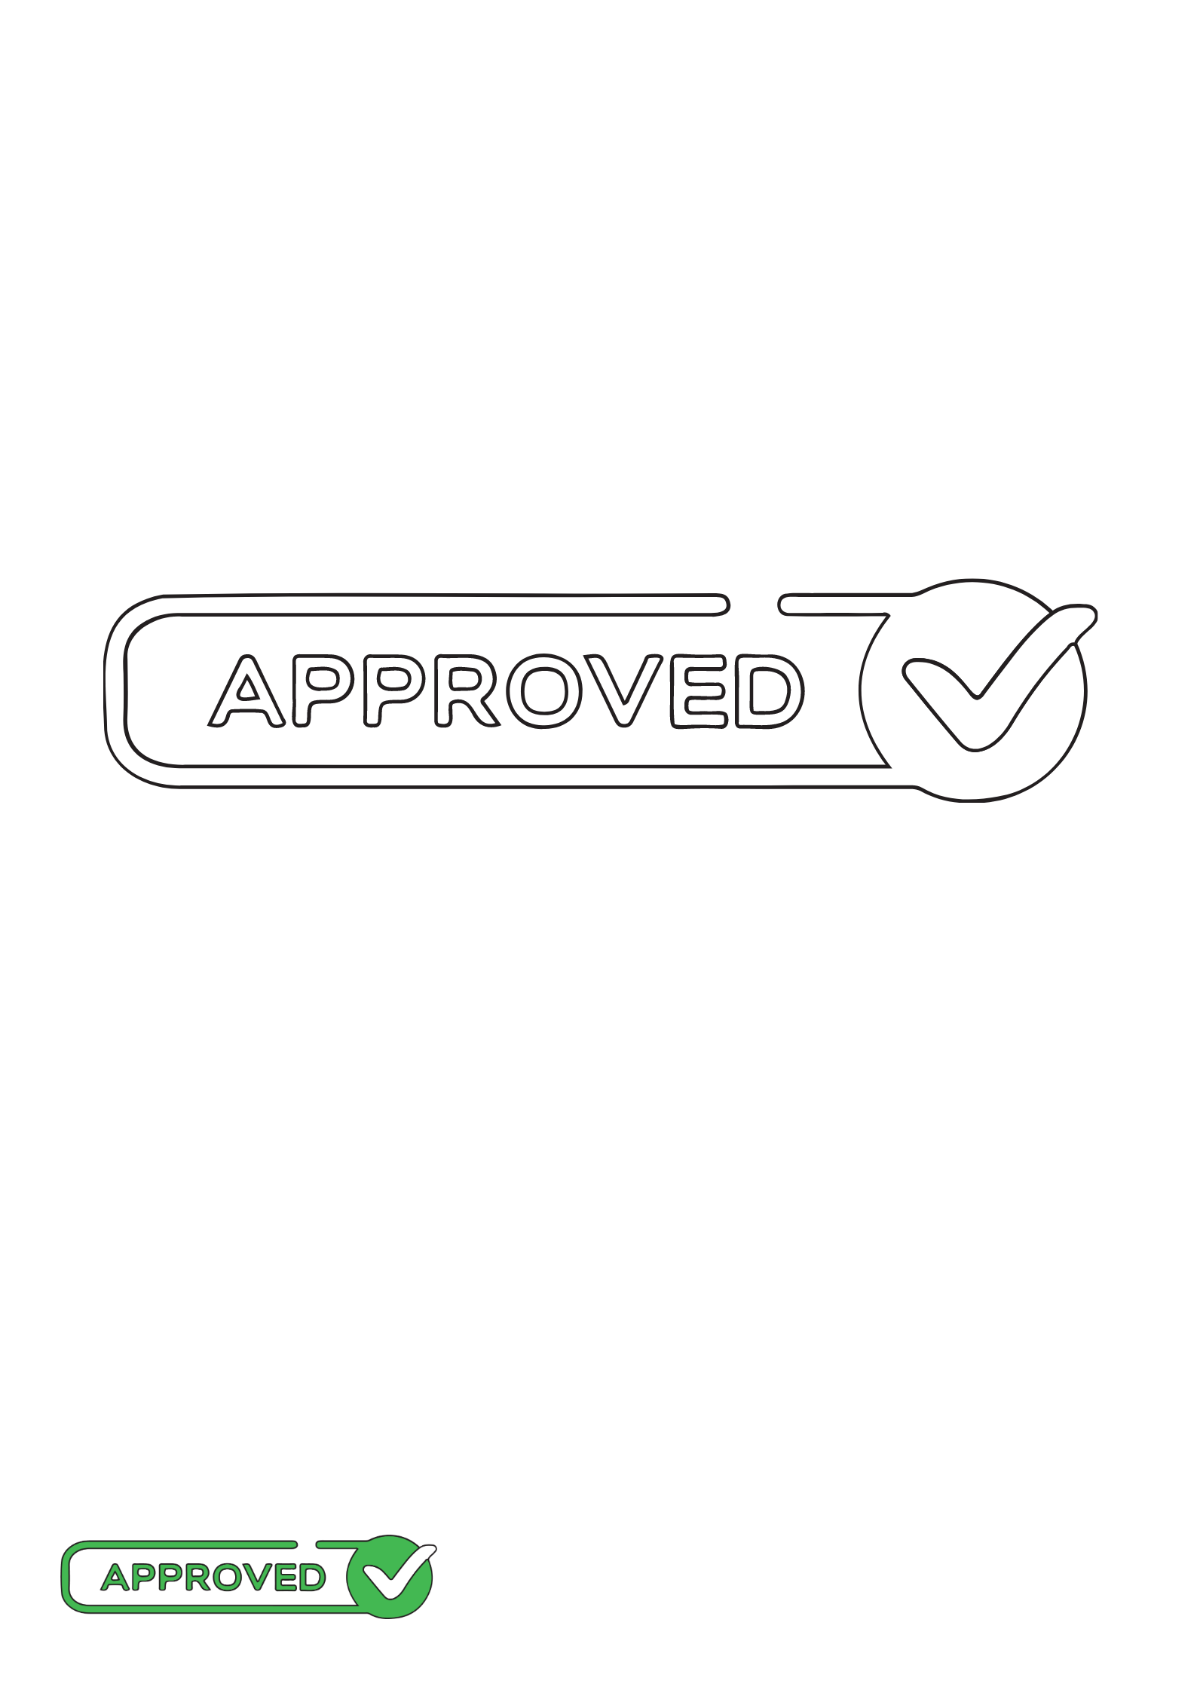 Free Tick Mark Approved coloring page Template